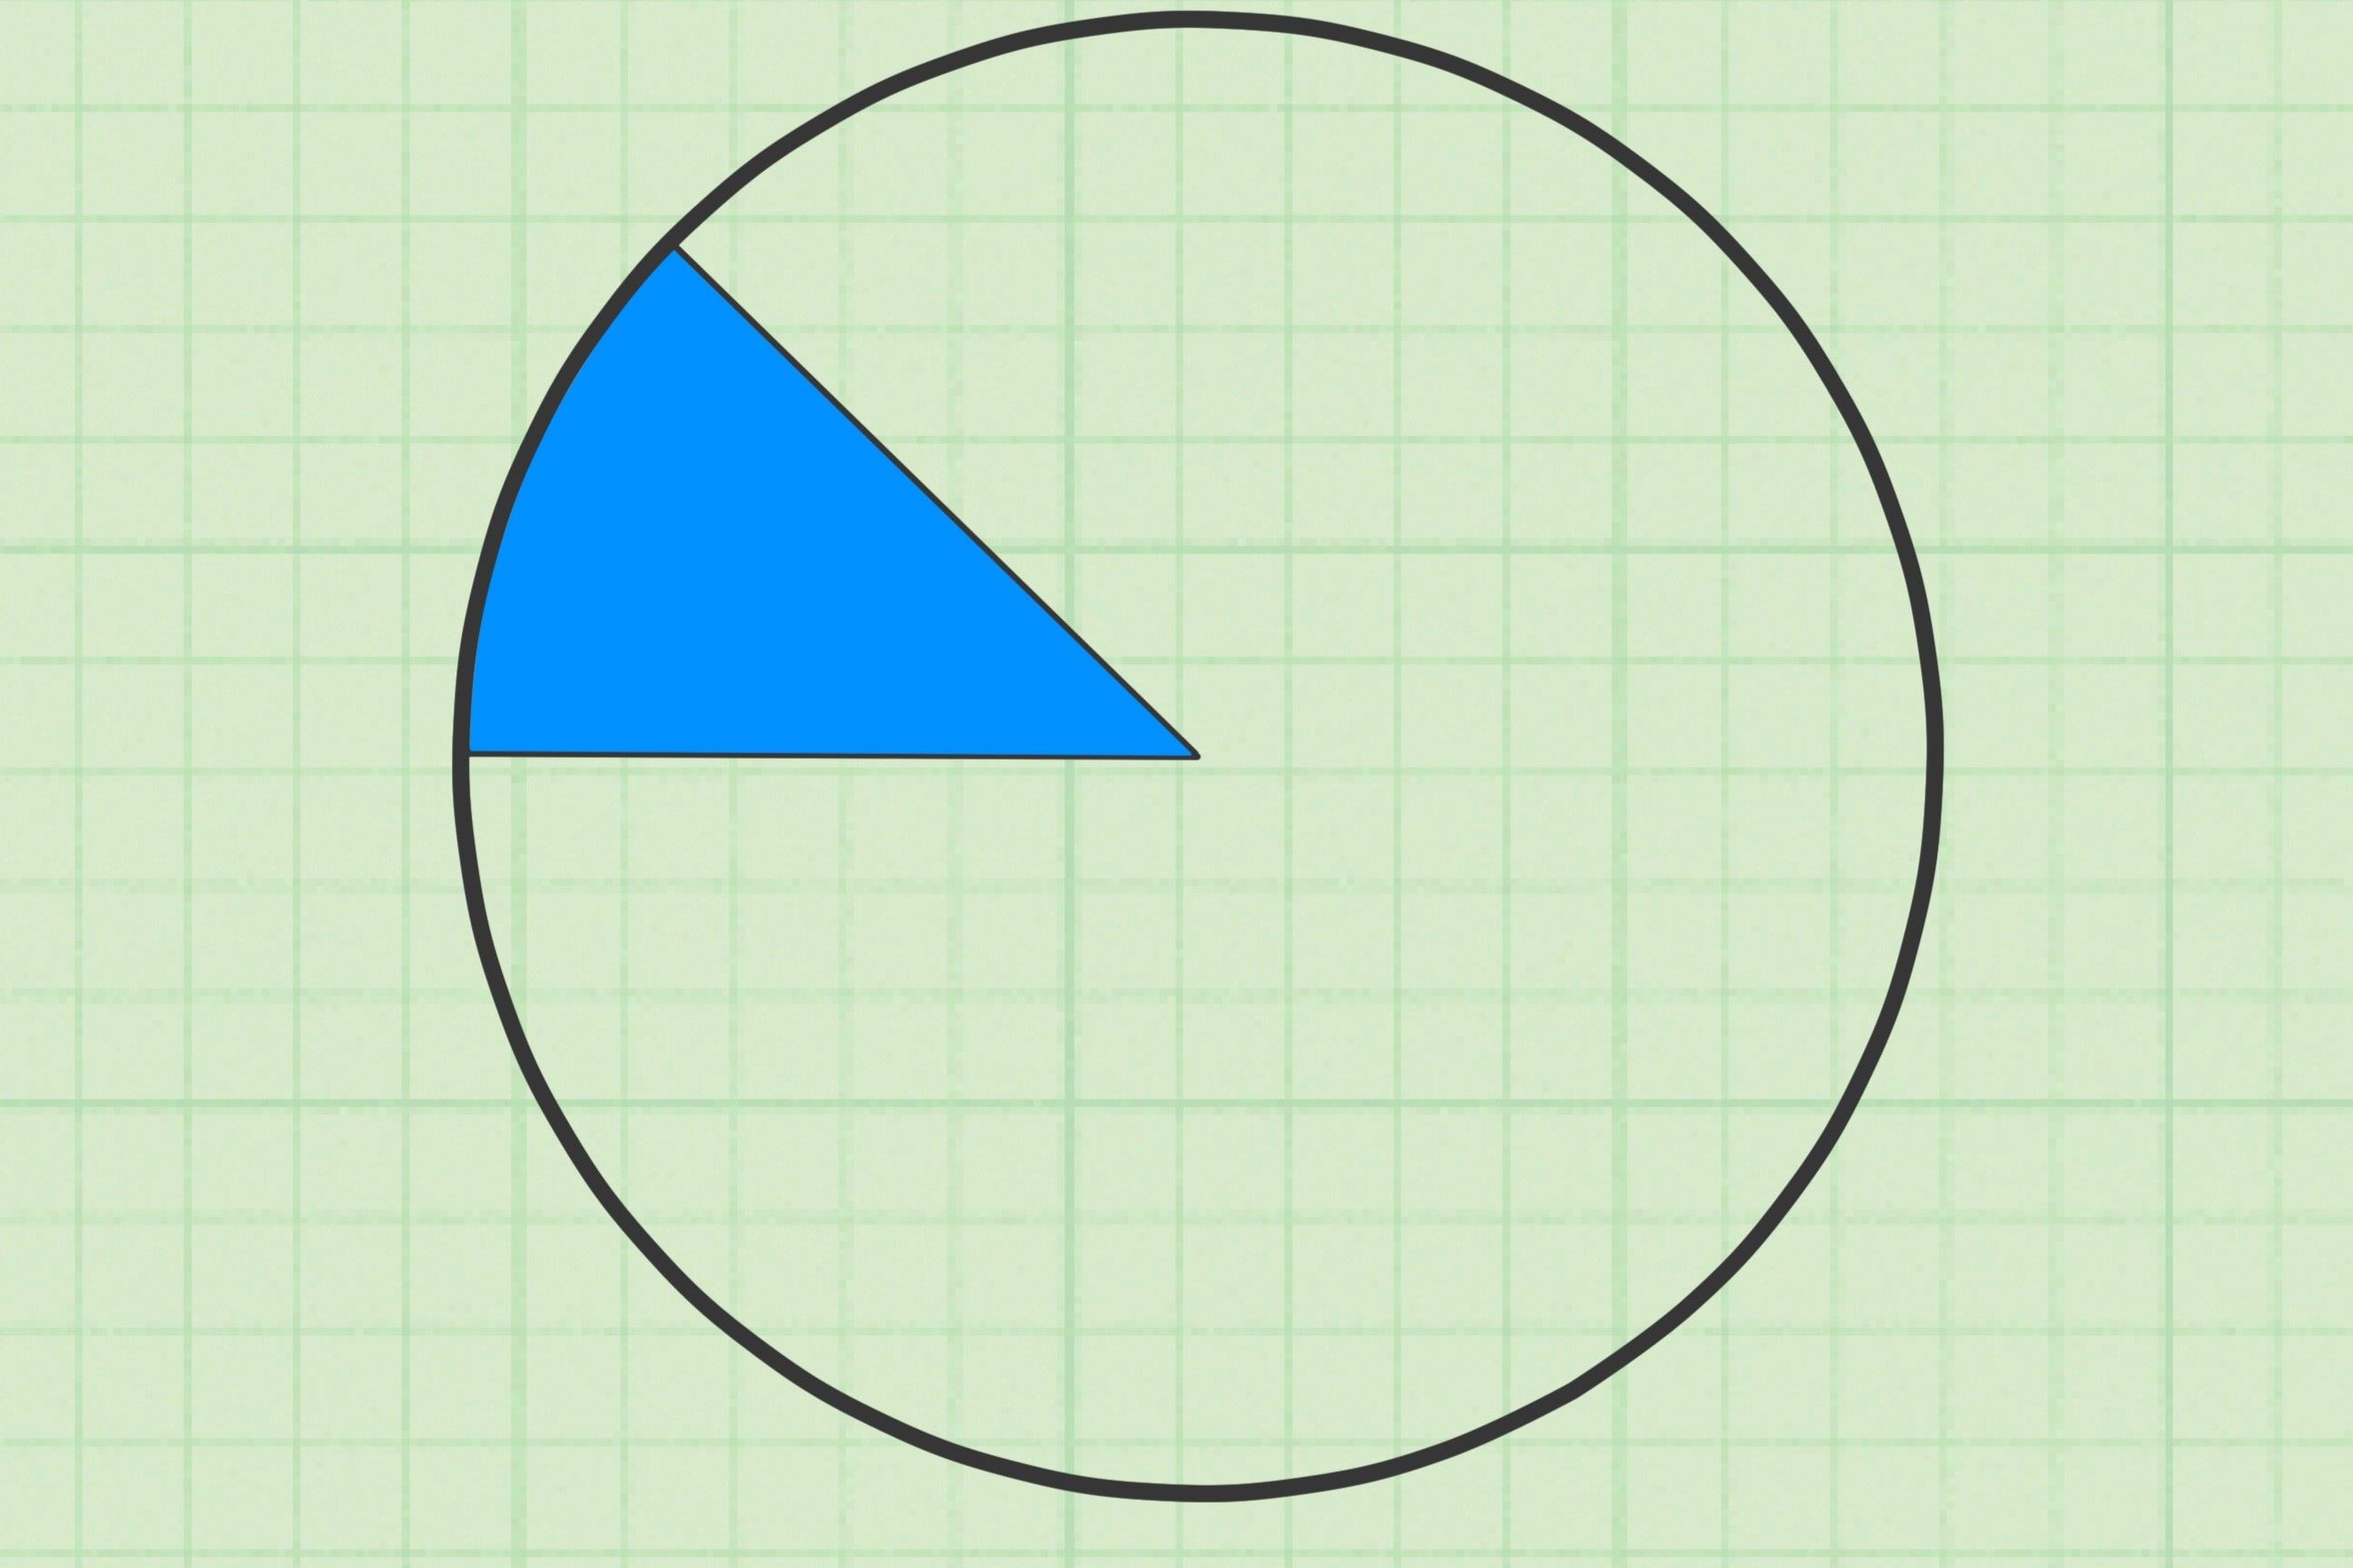 How To Calculate The Area Of A Circle Given The Radius